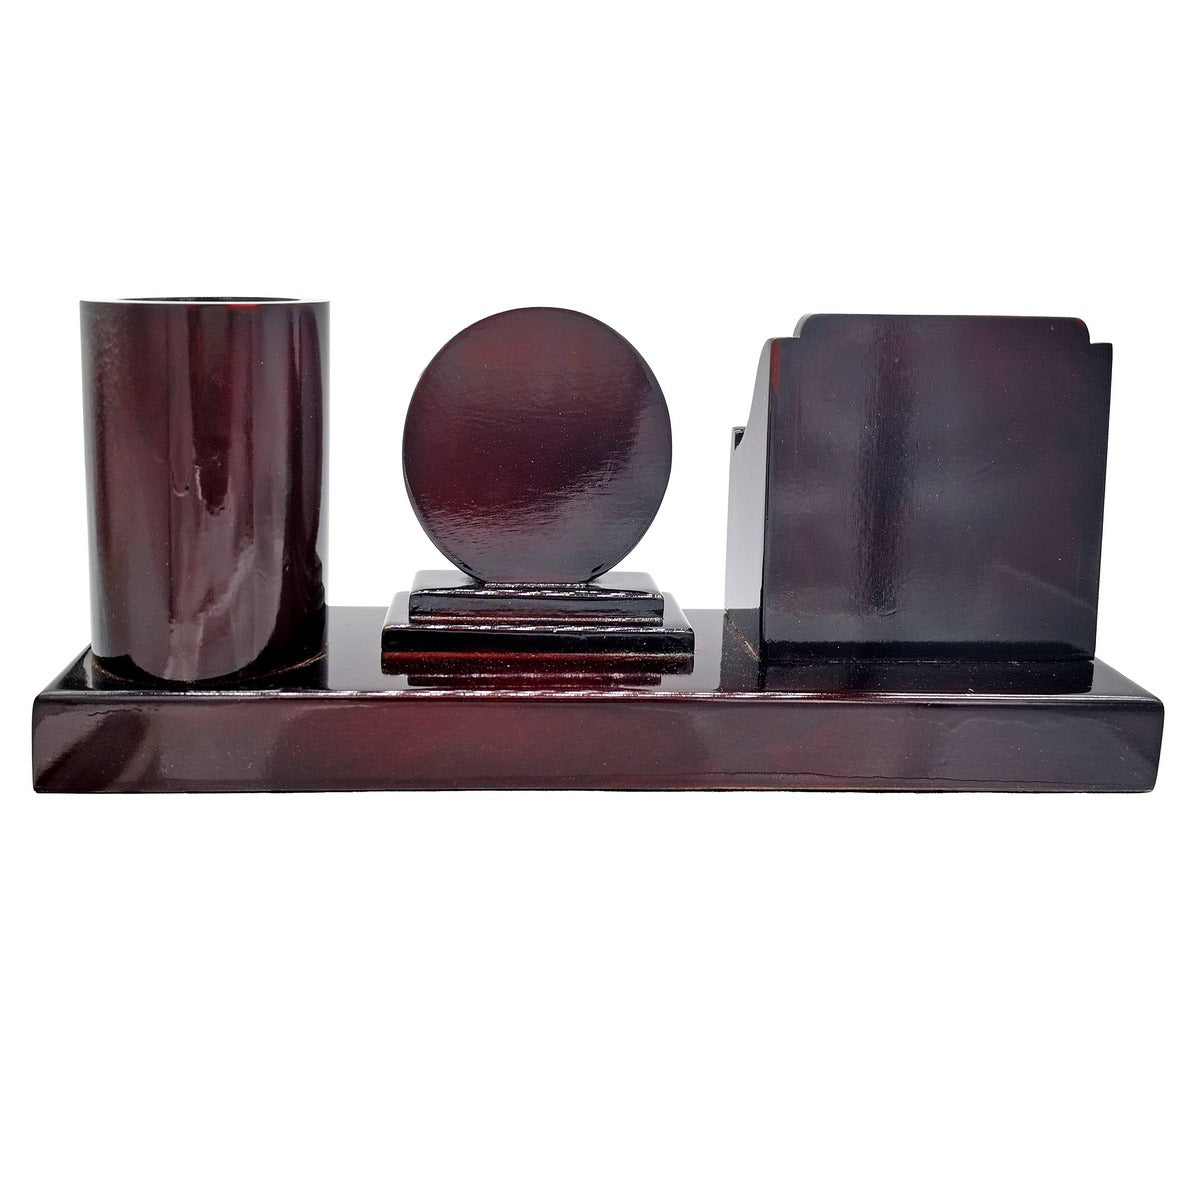 Wooden Pen Stand with Mobile Holder and Clock - For Corporate Gifting, Office, School, College Use